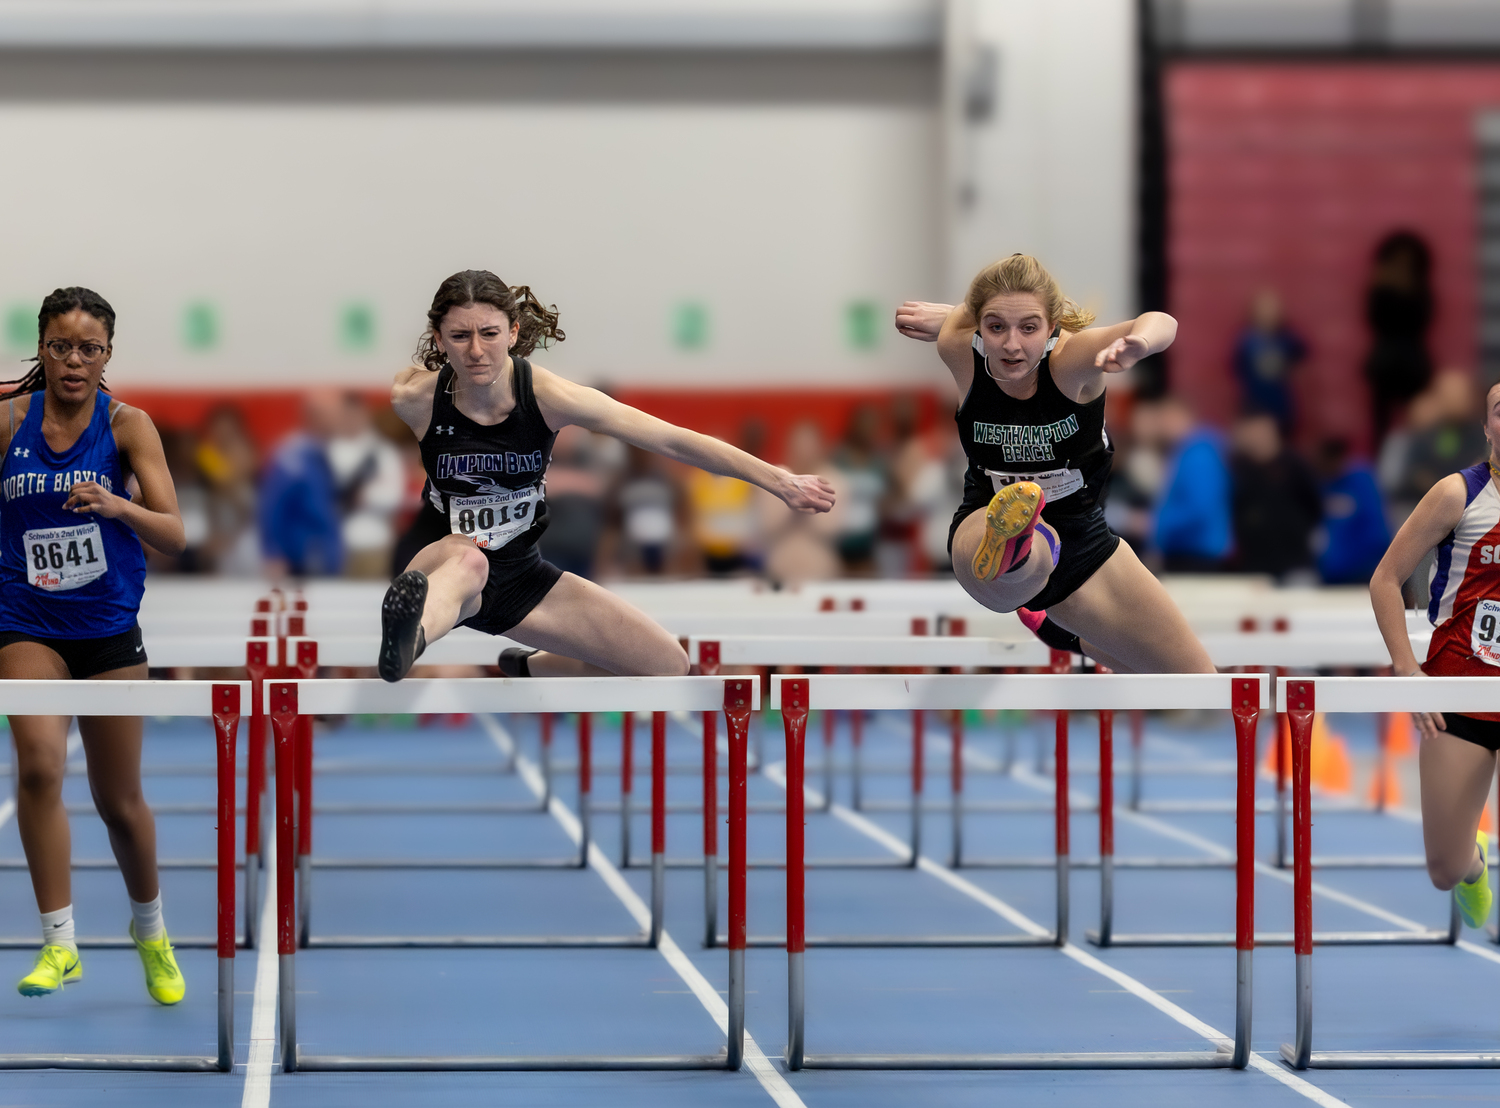 Hampton Bays senior Emma Halsey running stride for stride with Westhampton Beach senior Madison Phillips in the 55-meter hurdles. Halsey edged Phillips for fourth place and All-County honors.   RON ESPOSITO